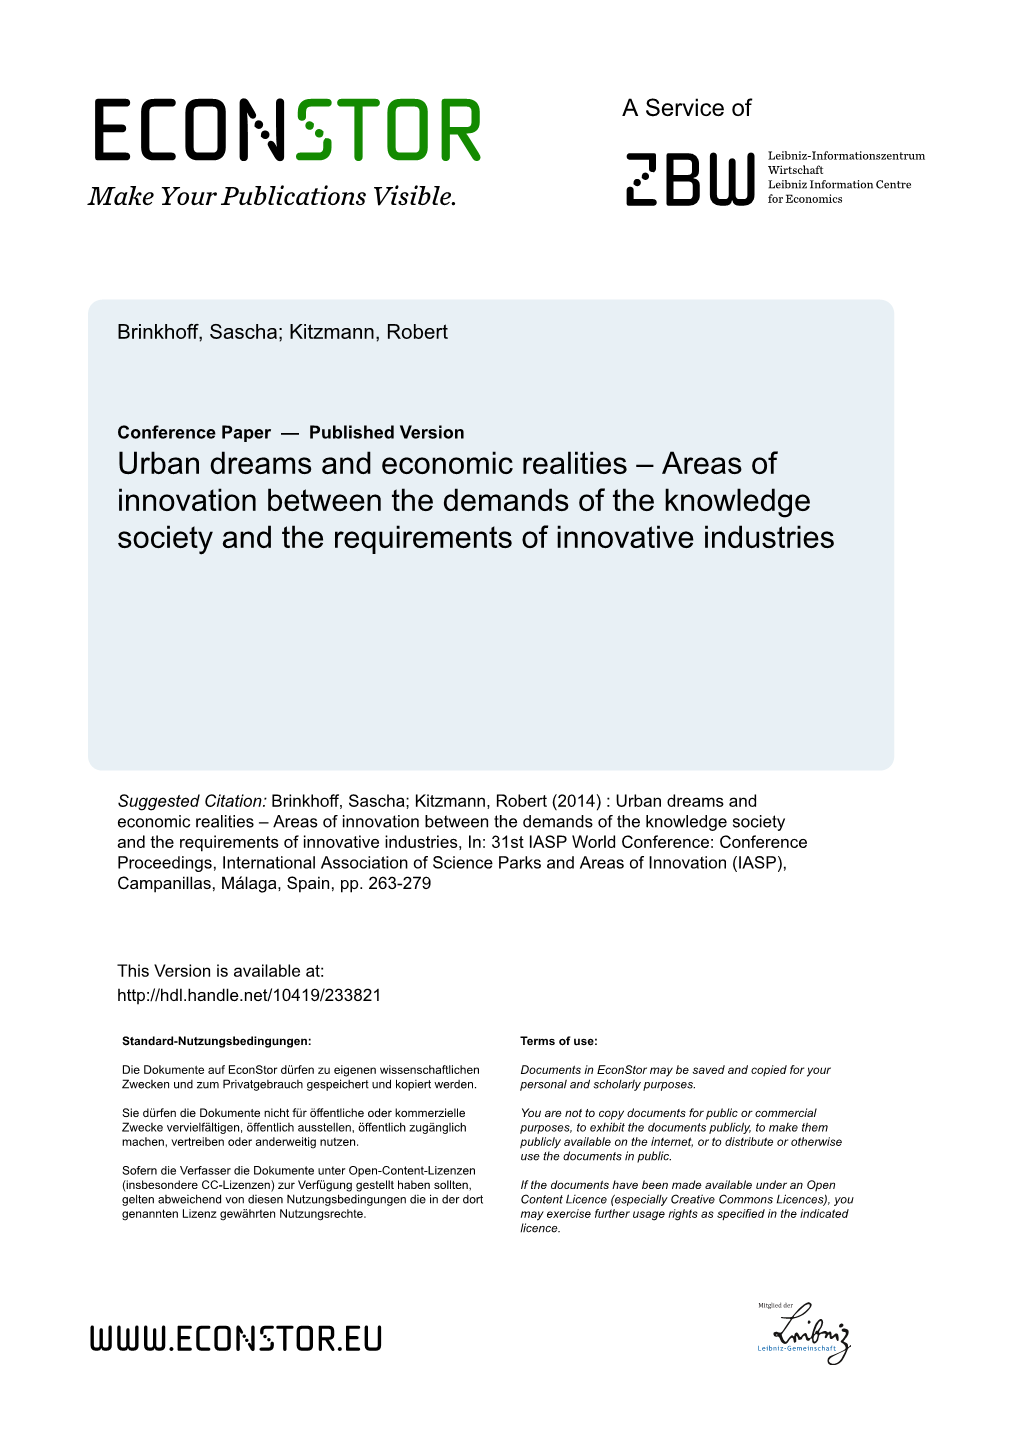 Urban Dreams and Economic Realities – Areas of Innovation Between the Demands of the Knowledge Society and the Requirements of Innovative Industries